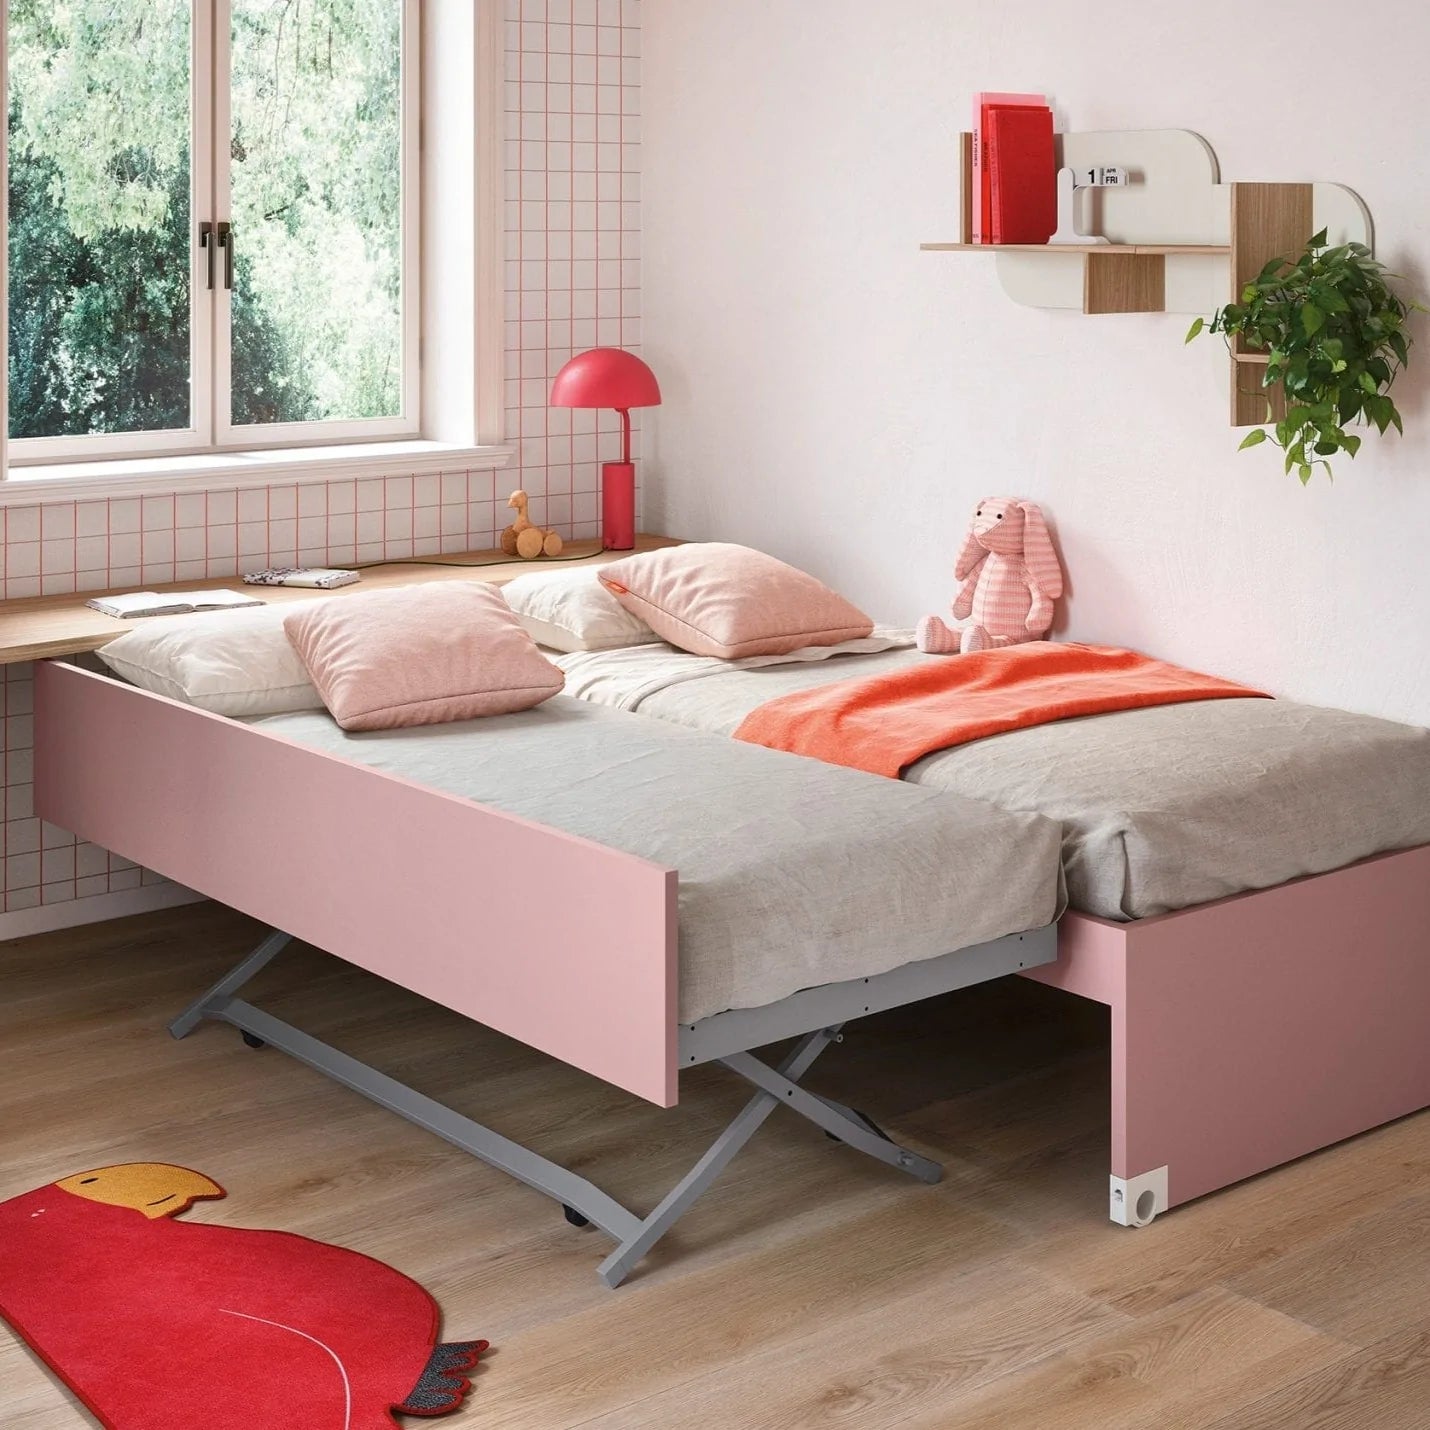 Children’s Trundle Bed Explained